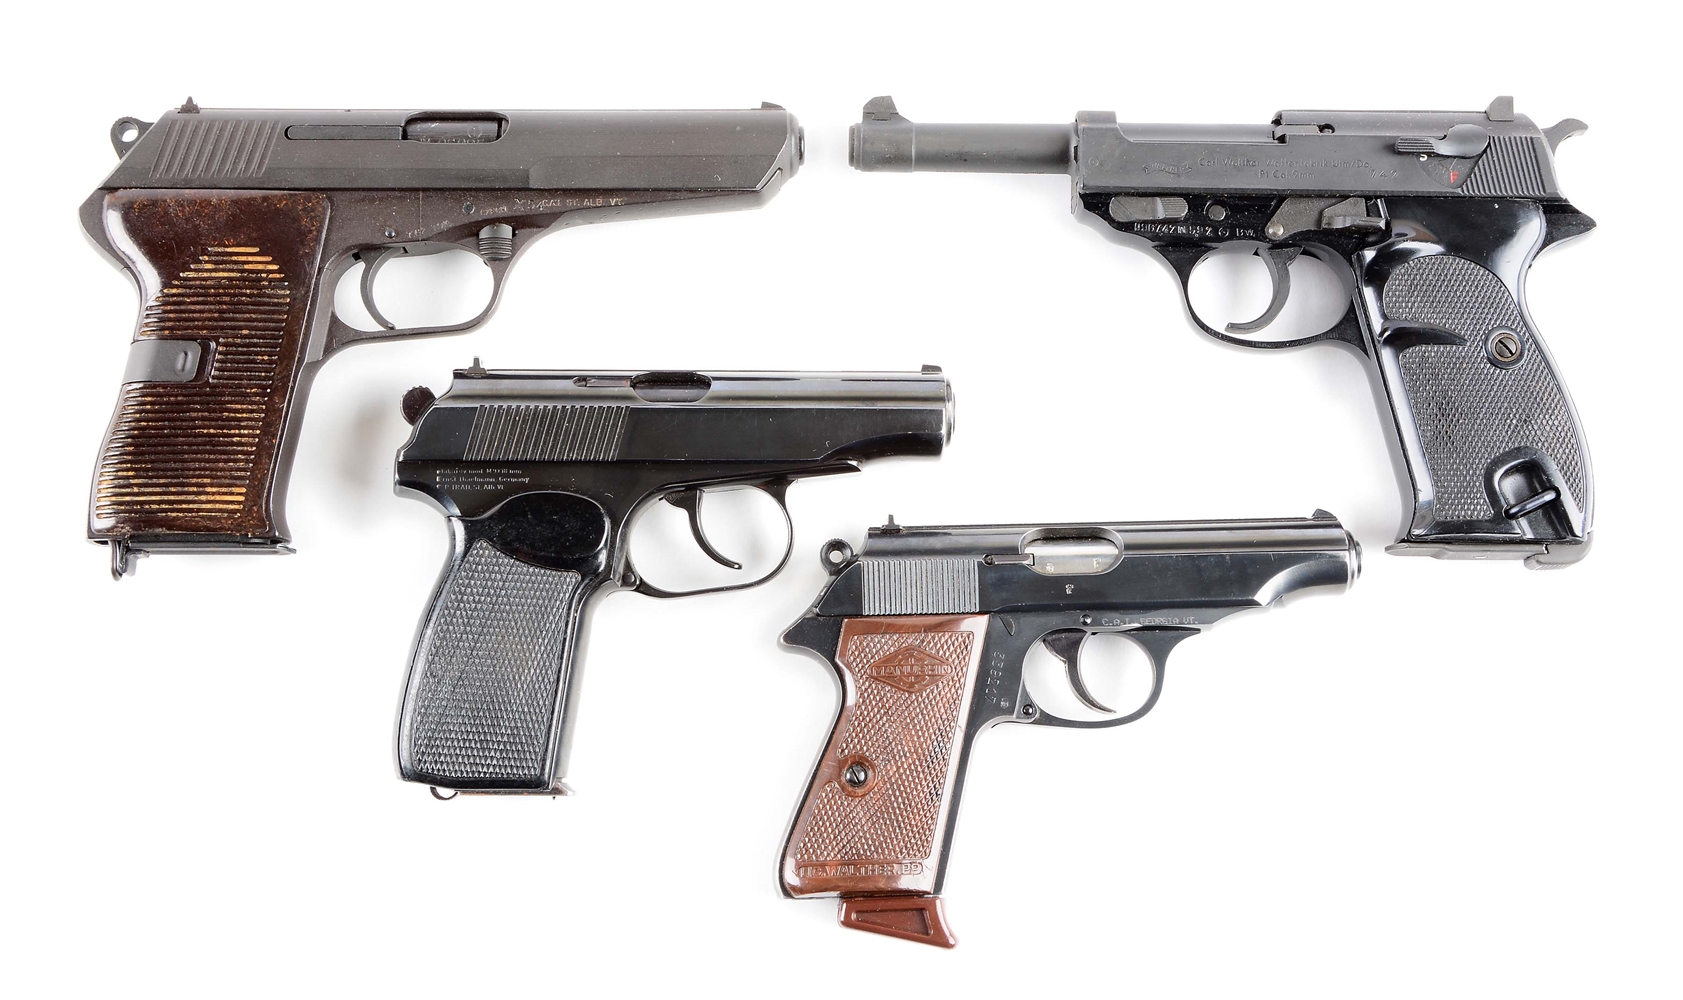 (C) LOT OF 4 POST WAR EUROPEAN SEMI-AUTOMATIC PISTOLS: CZECH CZ 52, EAST GERMAN MAKAROV, WALTHER P1 IN BOX, & FRENCH MANURHIN WALTHER PP .